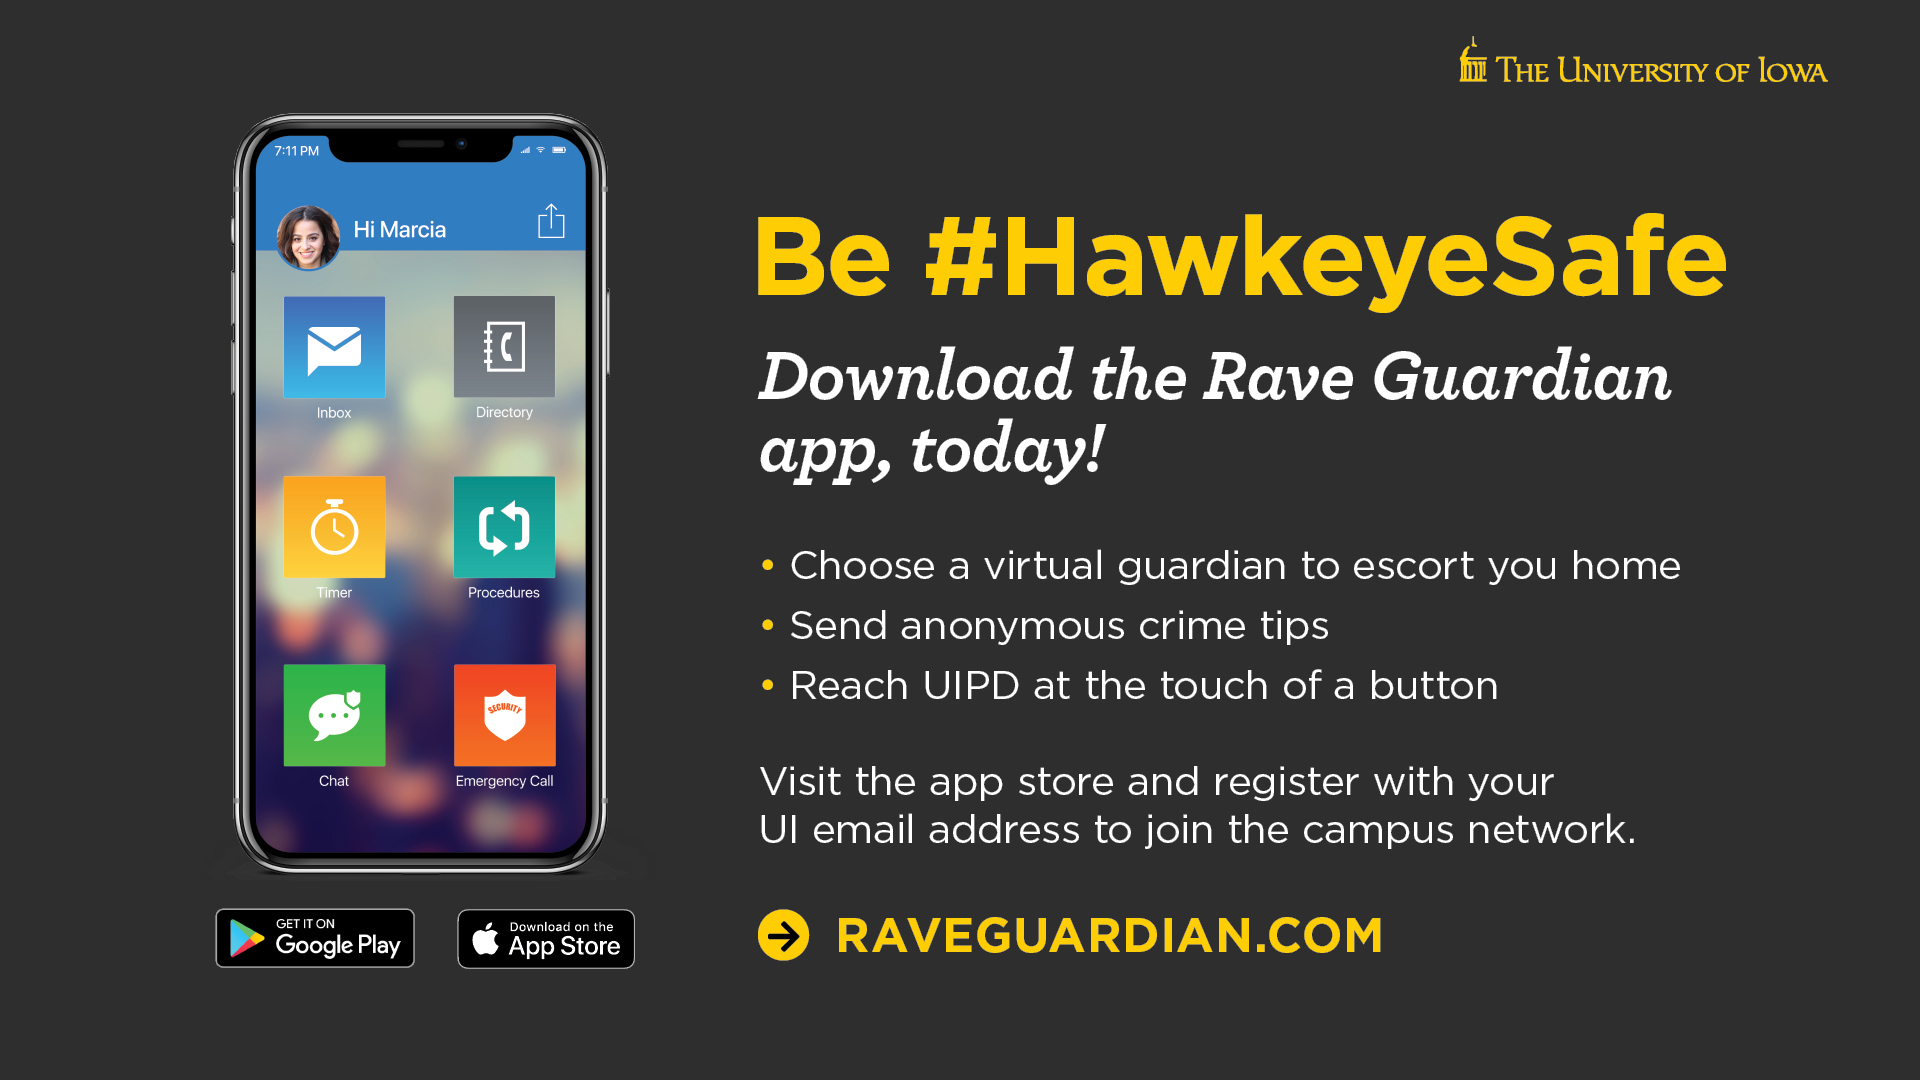 Download the Rave Guardian app, today